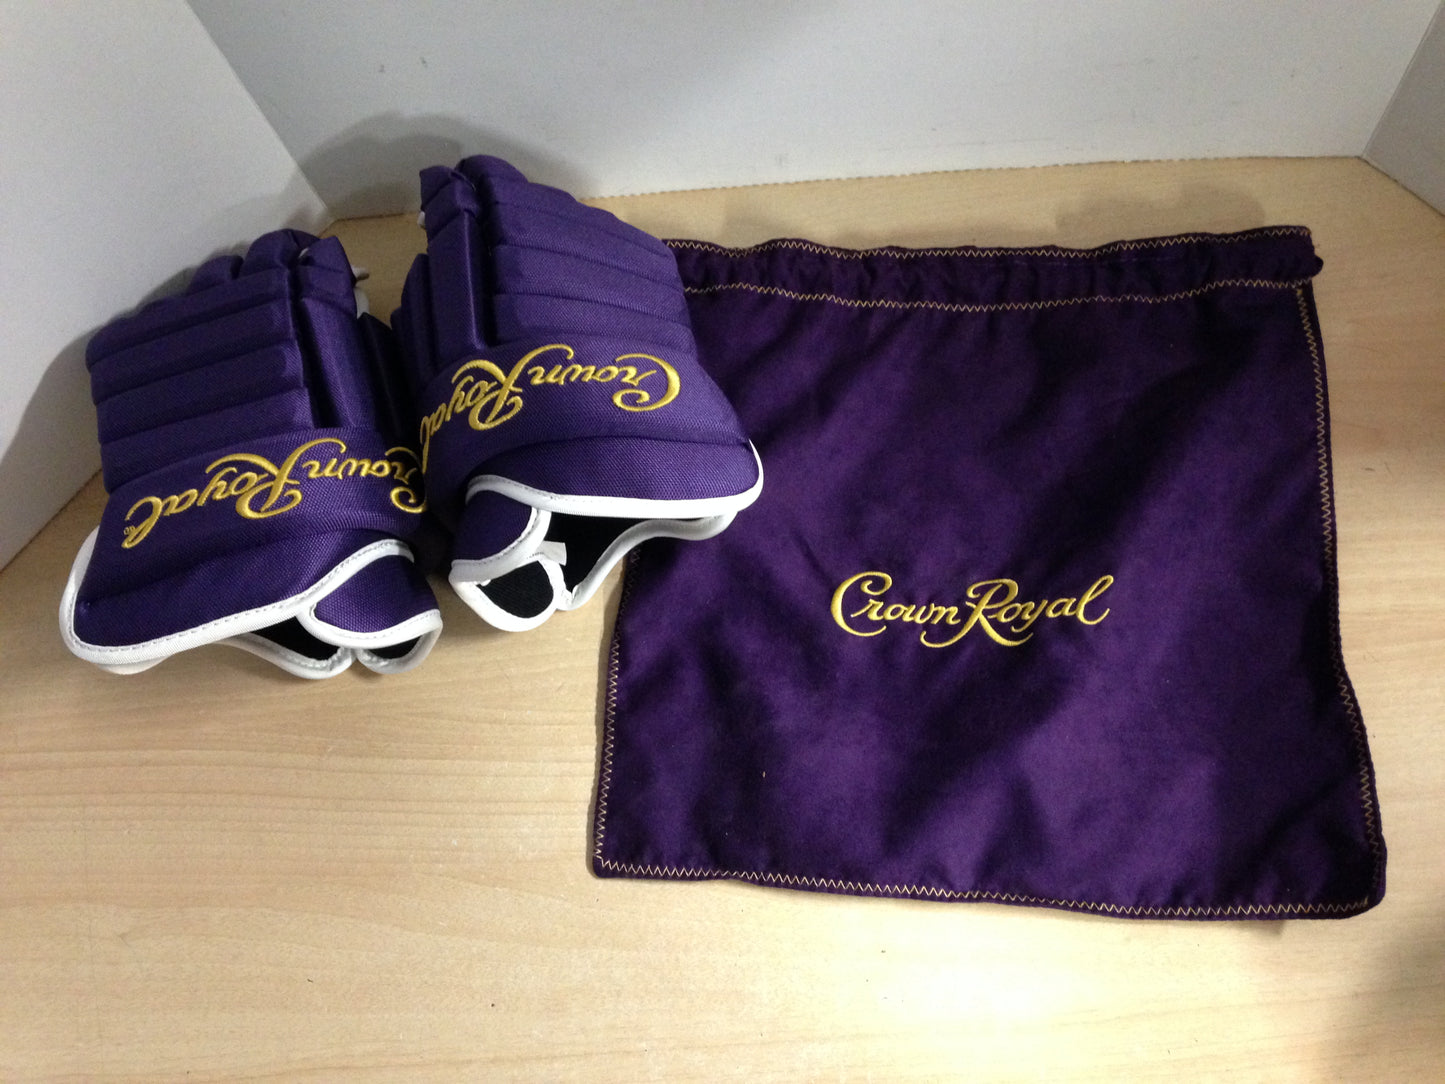 Hockey Gloves Men's Size 14" Crown Royal RARE To Find Collectors Set With Bag Only A Few Made These Are NEW